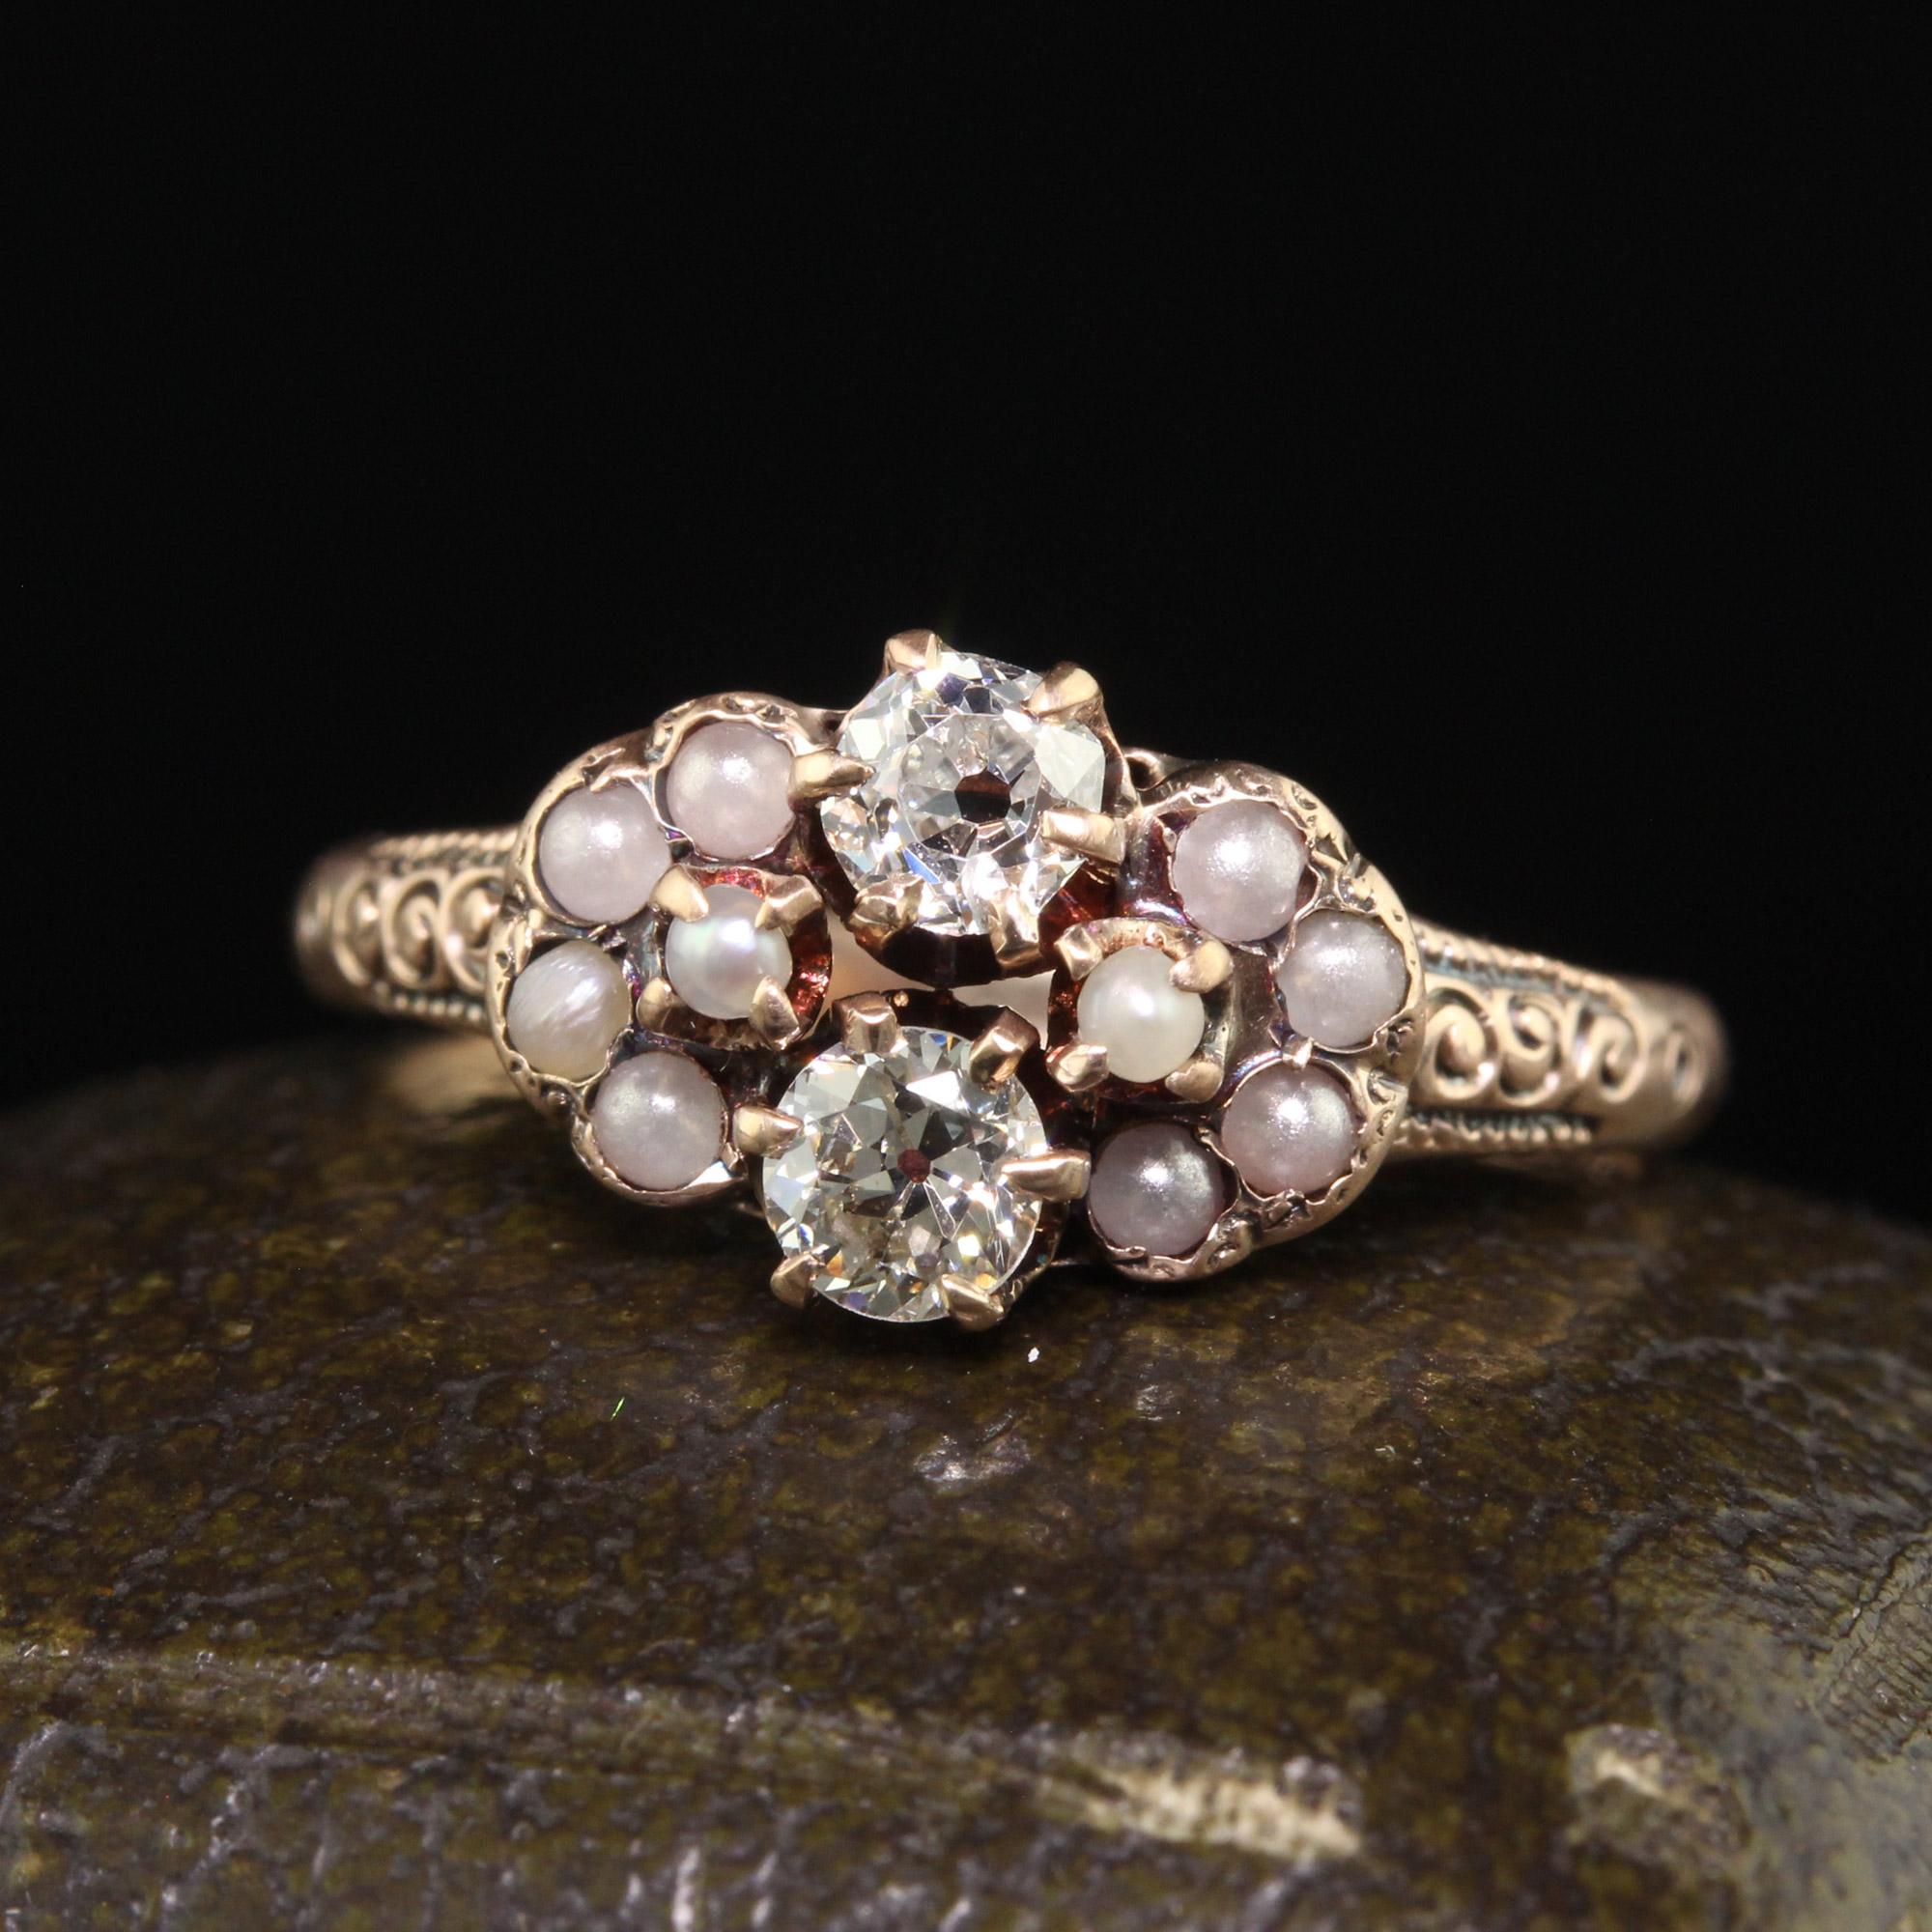 Beautiful Antique Victorian 10K Yellow Gold Old Euro Diamond and Pearl Toi et Moi Ring. This beautiful Toi et Moi ring is crafted in 10k yellow gold. The center holds two old European cut diamonds and they are surrounded by natural seed pearls on